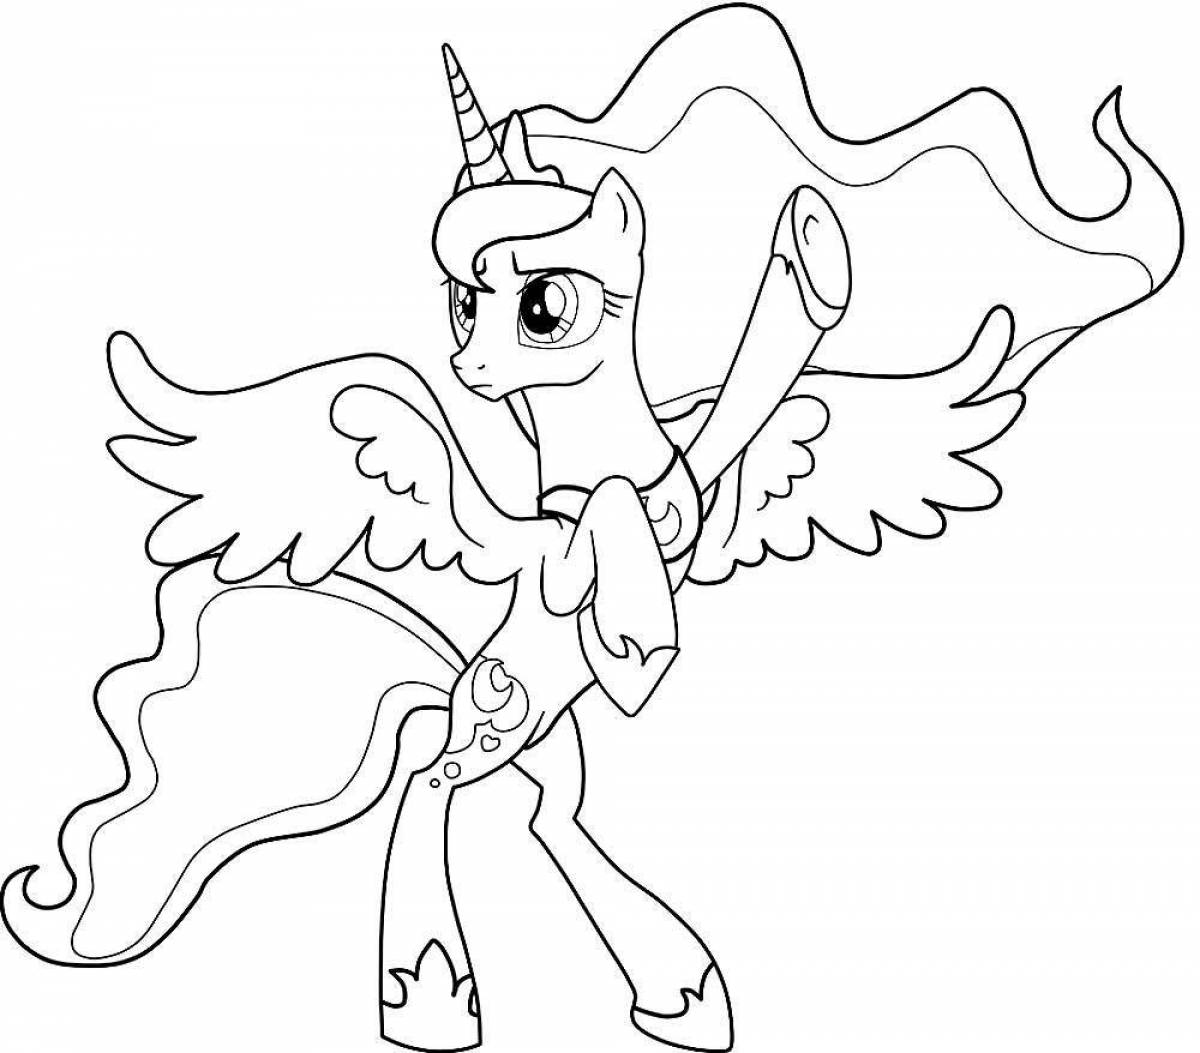 Showy pony coloring book